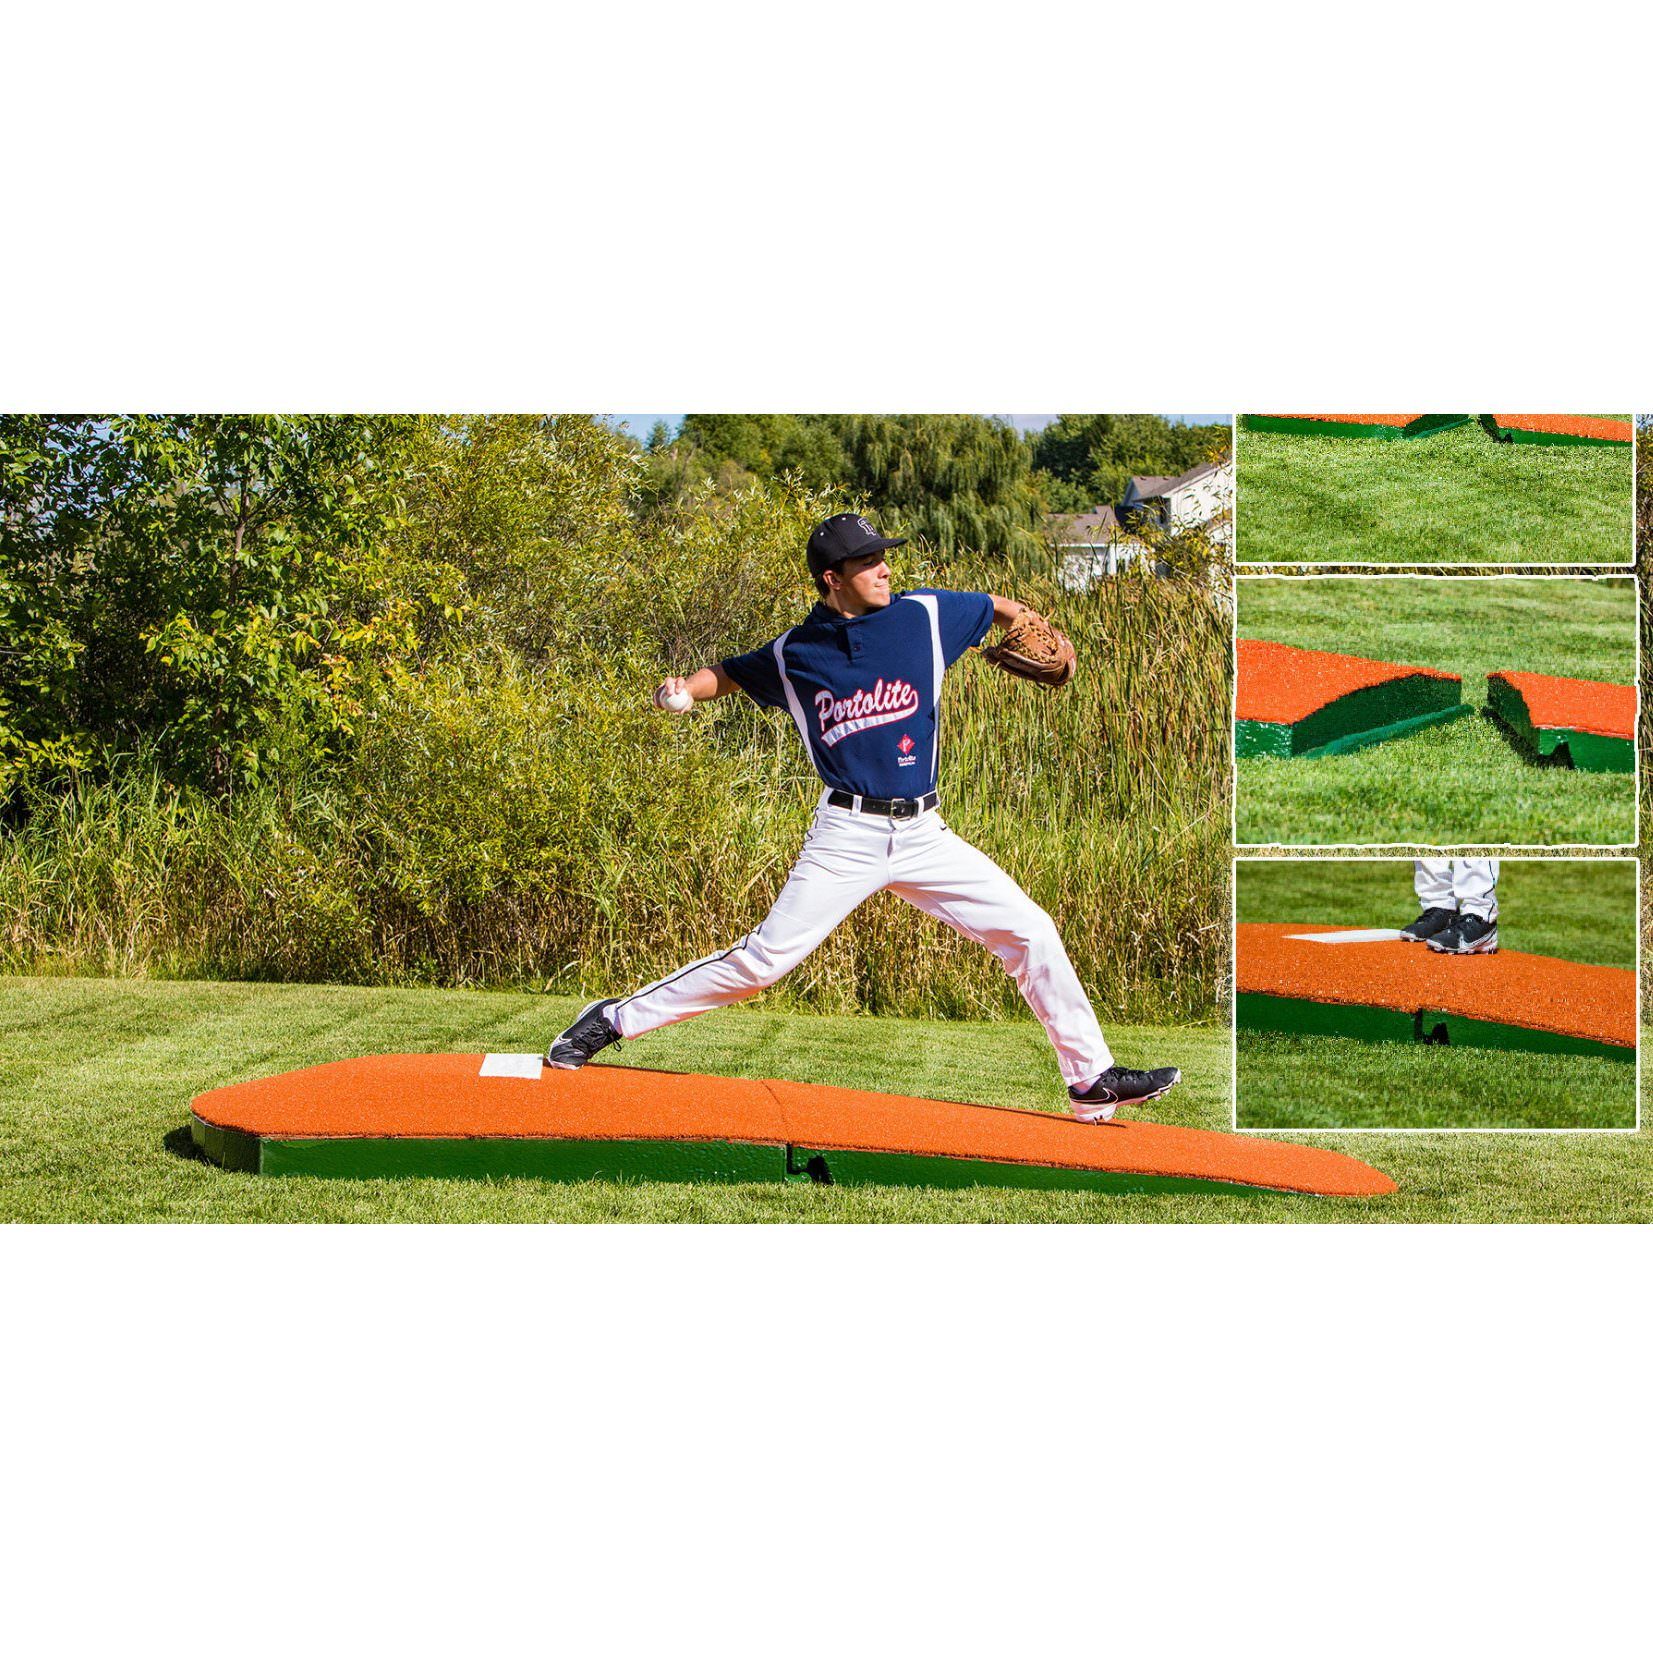 Portolite 10" Full Size 2-Piece Portable Practice Pitching Mound clay with features